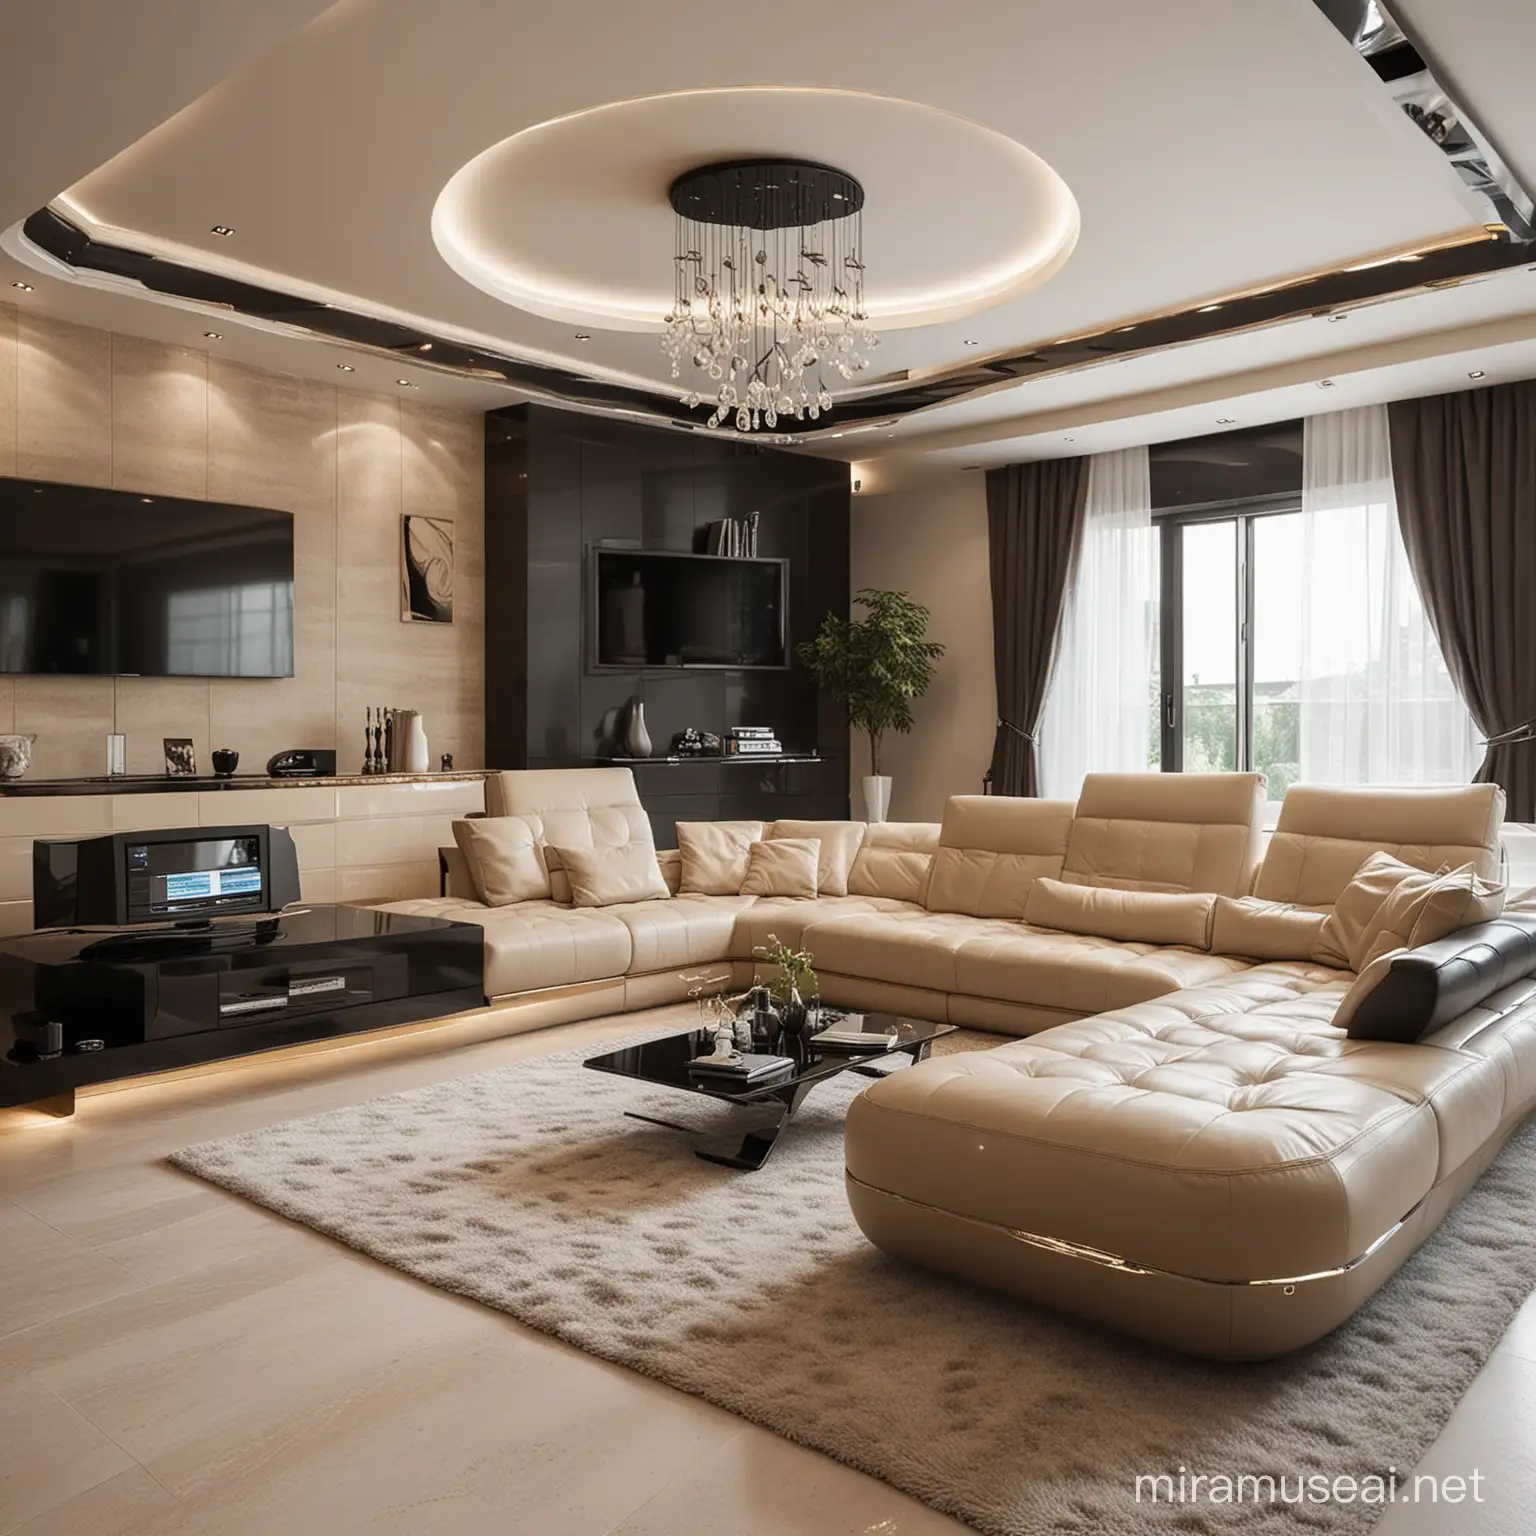 Futuristic Villa Interior with HighTech Features and Modern Furnishings